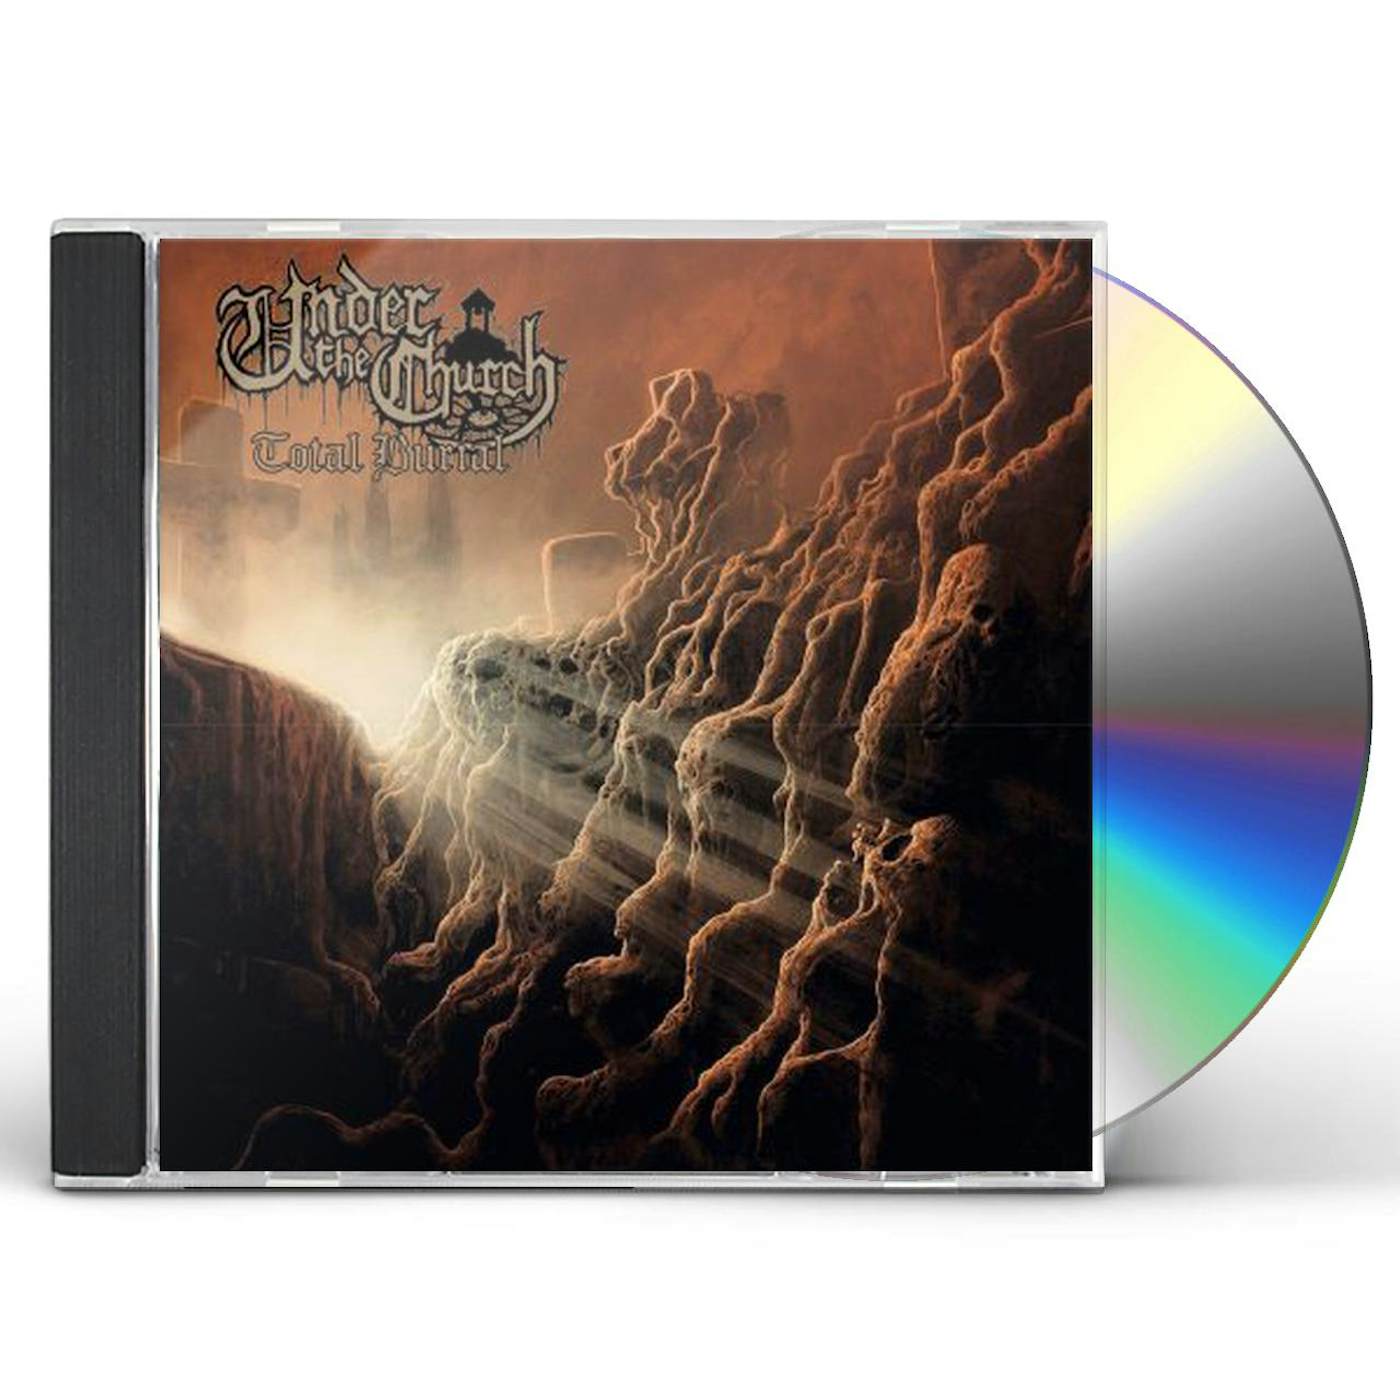 Under The Church TOTAL BURIAL CD